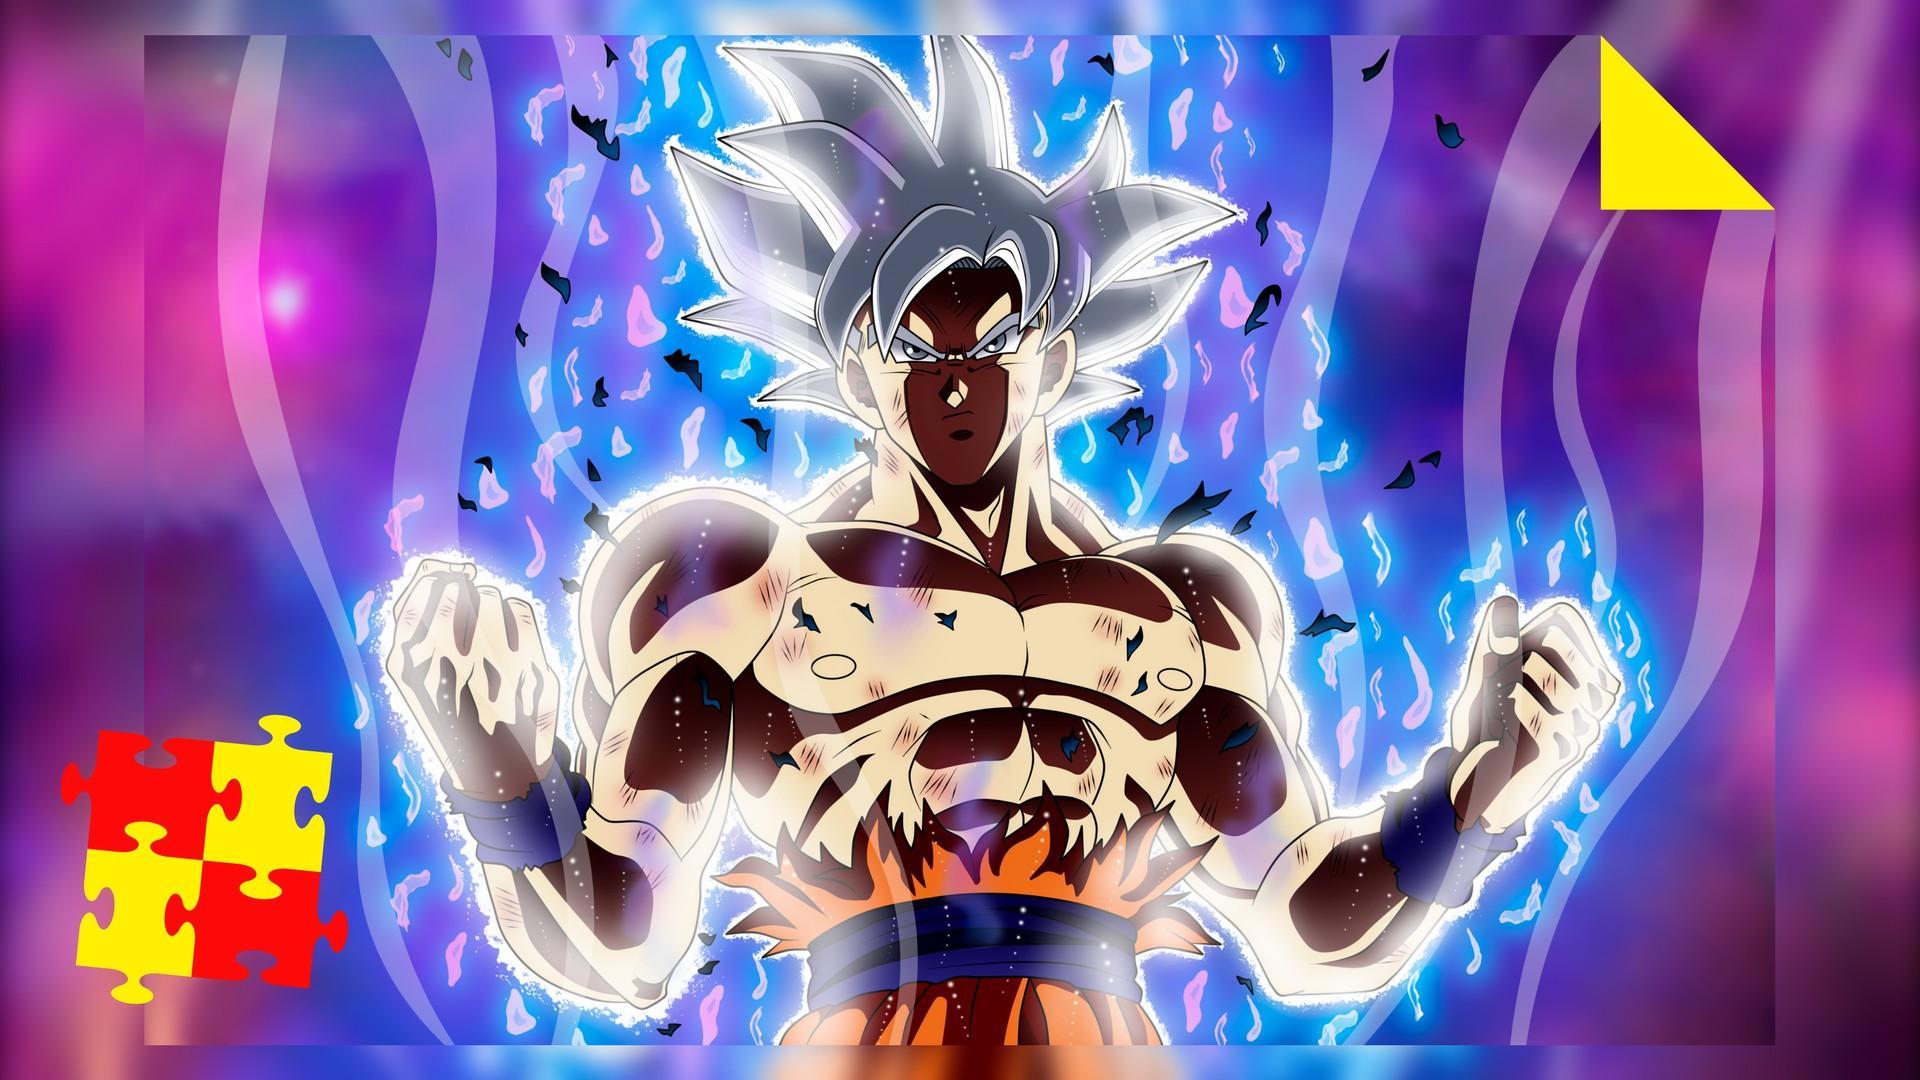 Anime Jigsaw Puzzles Games: DBS Saiyan Goku Puzzle for Android - APK  Download